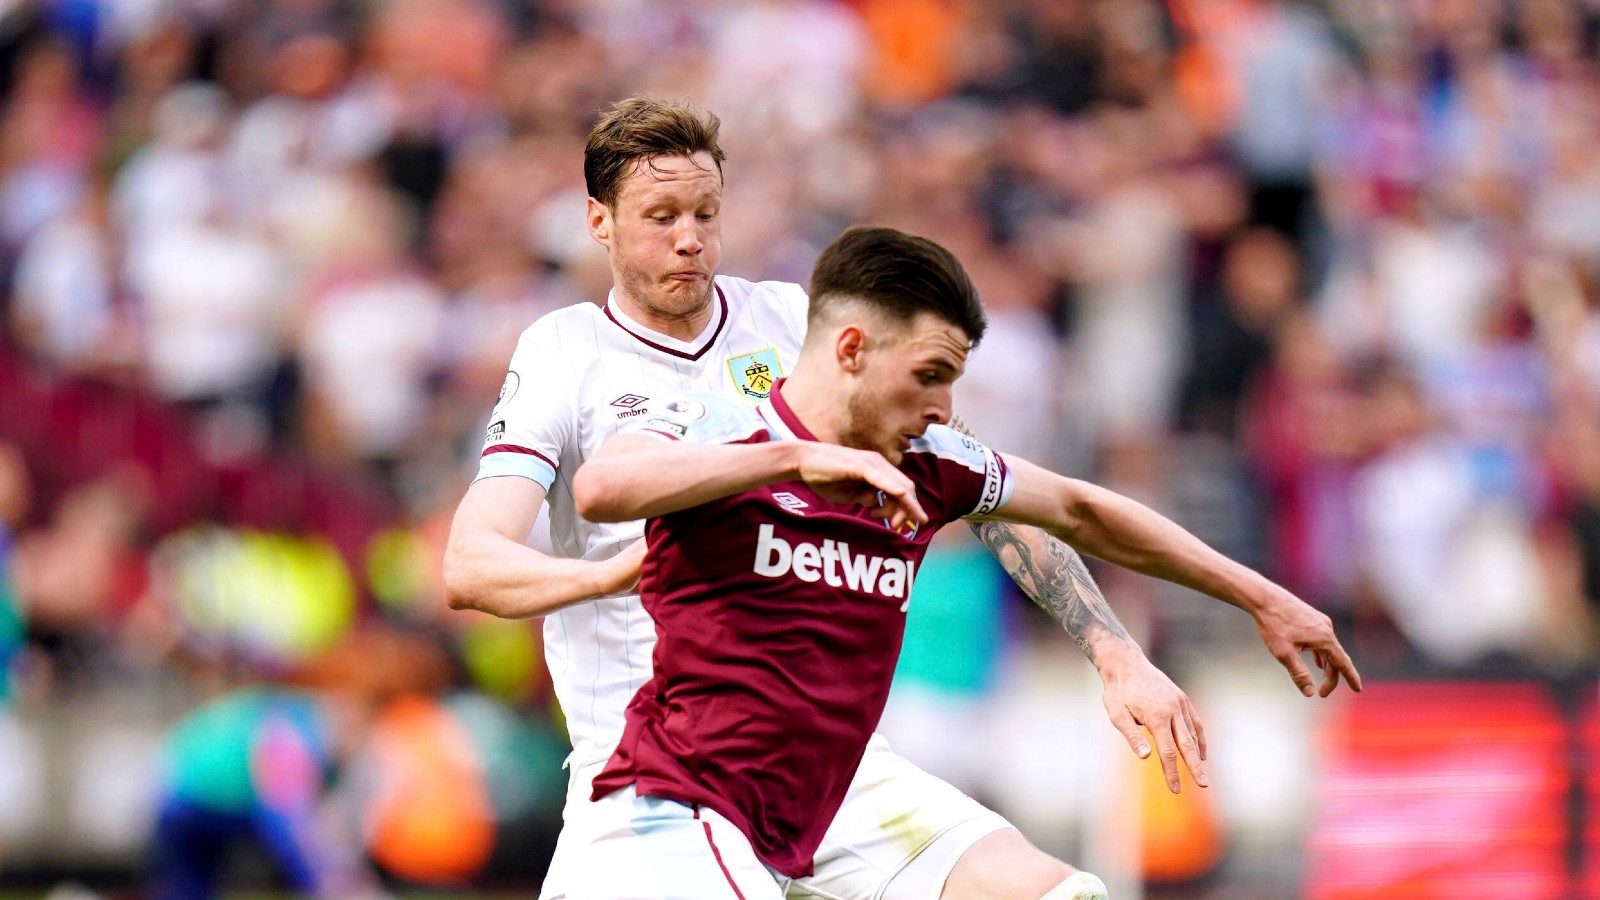 Premier League Struggling Burnley Held 1-1 at West Ham After Sean Dyches Exit